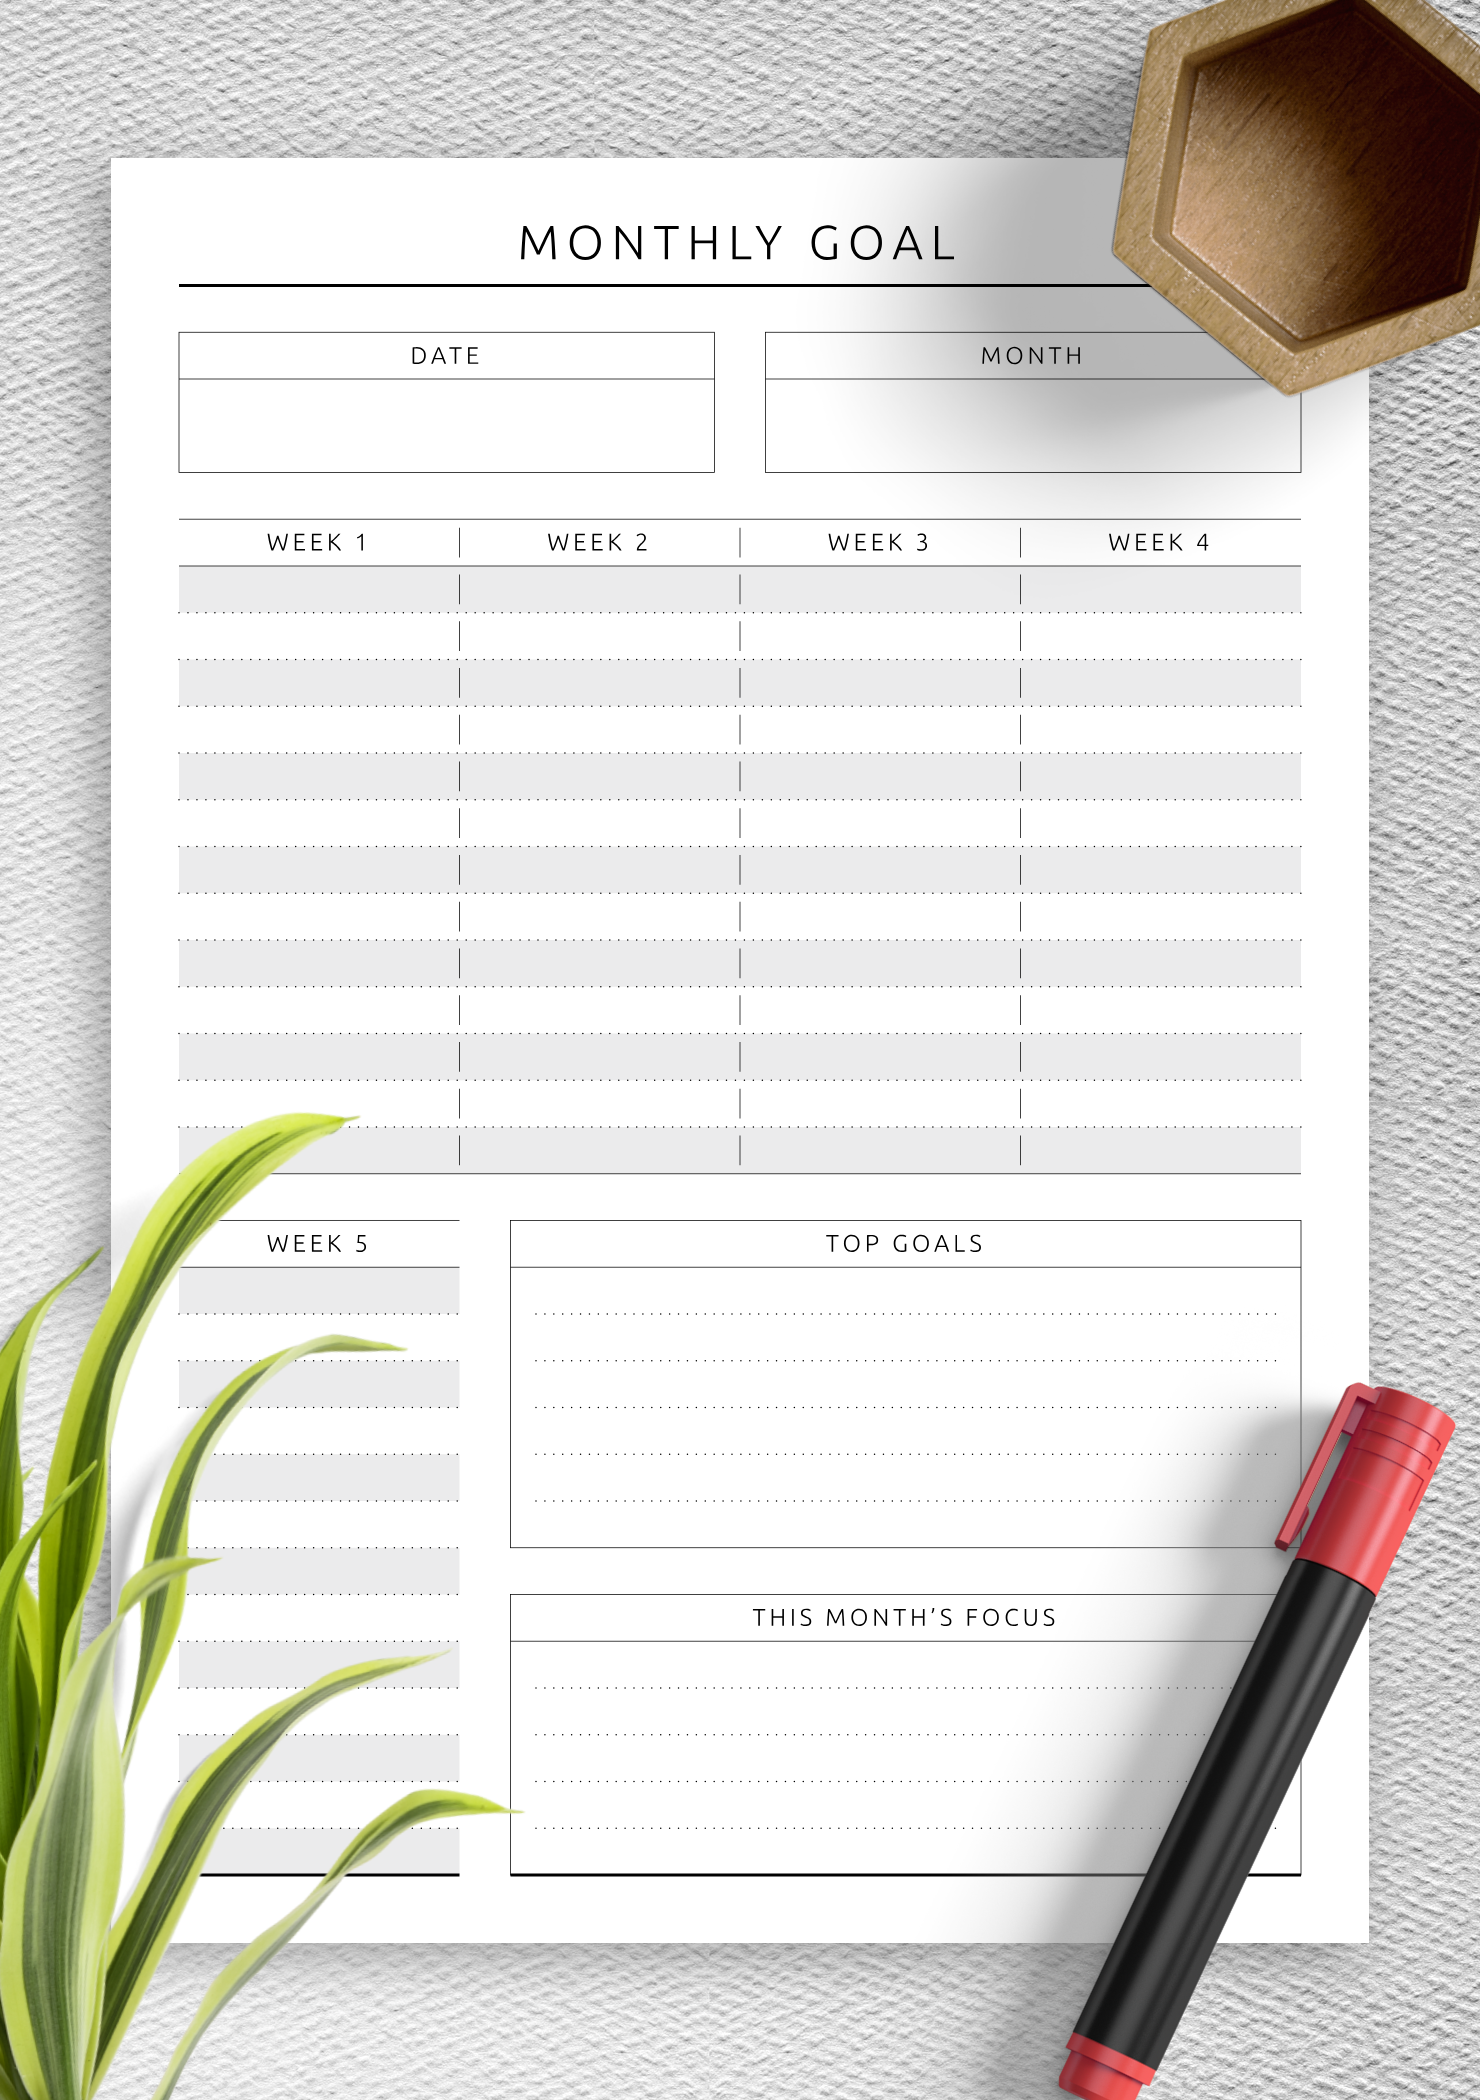 goal-setting-templates-and-goal-planners-download-pdf-weekly-goal